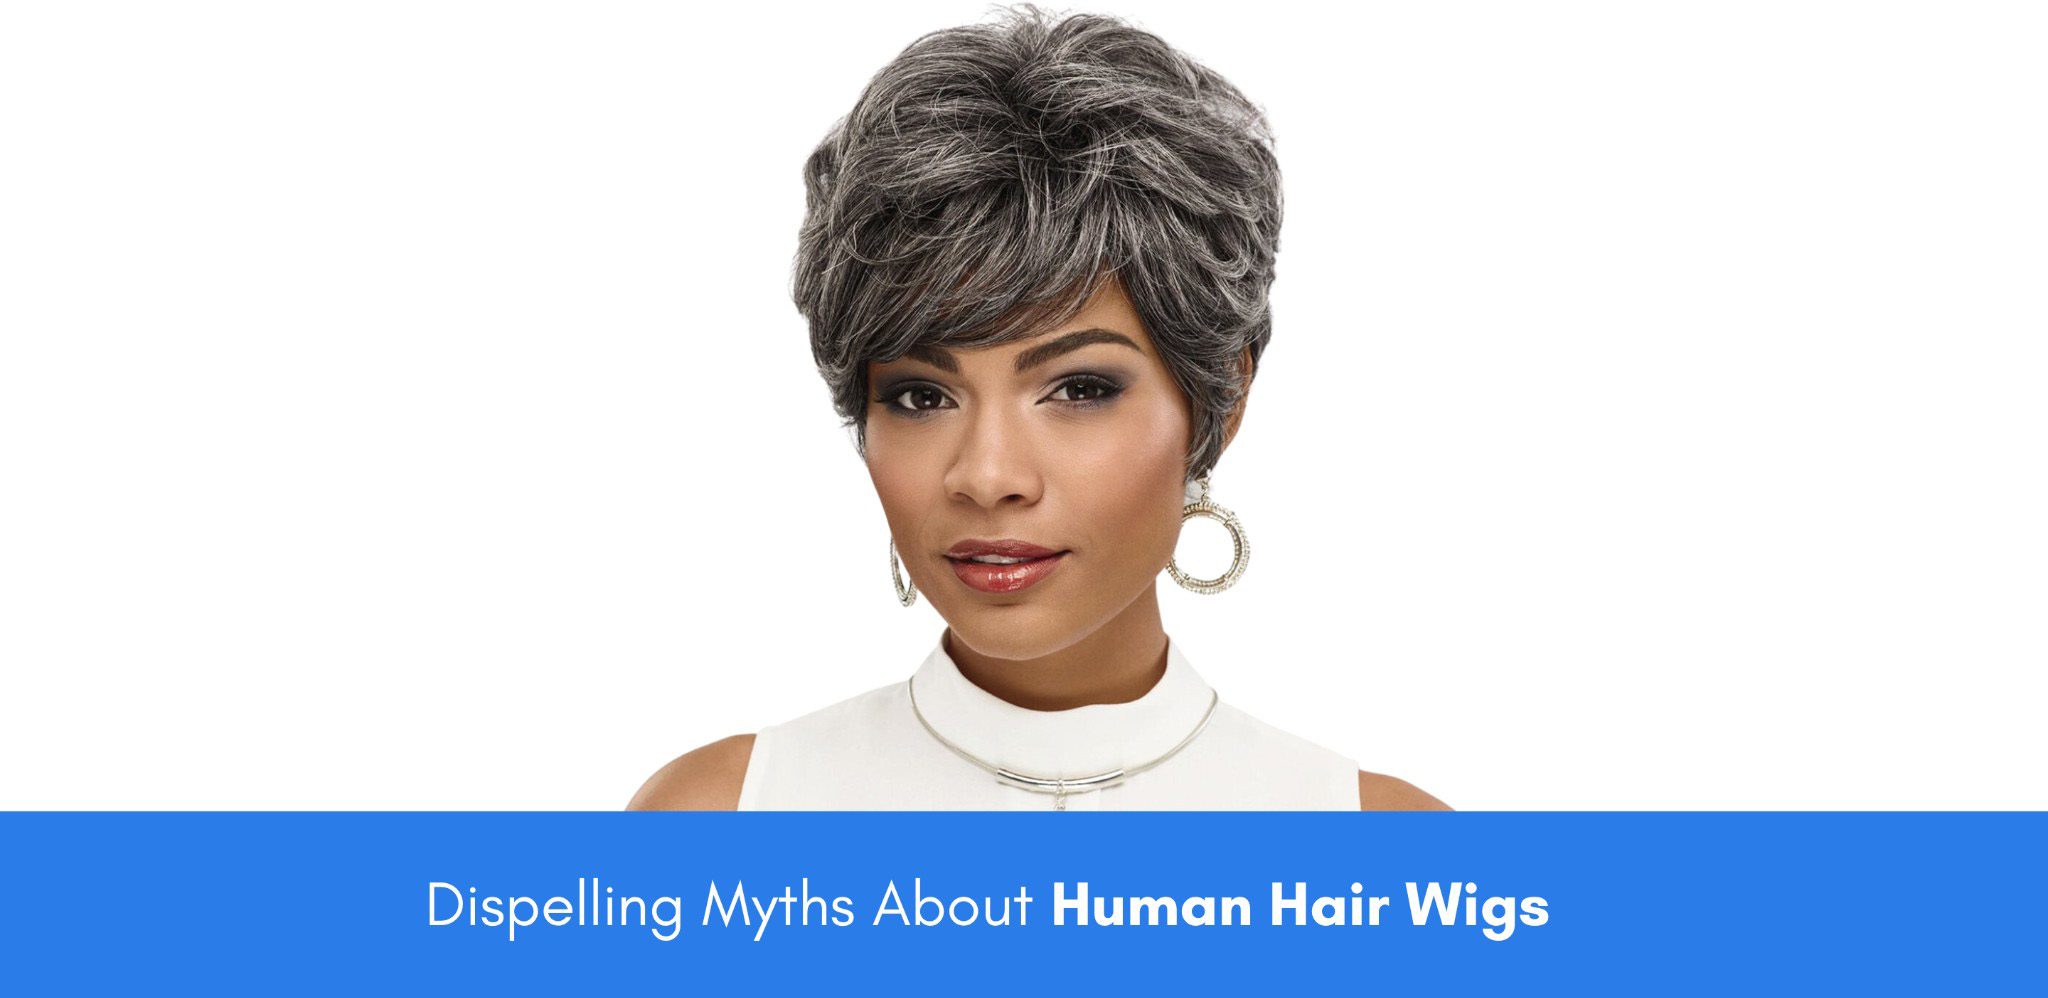 Dispelling Myths About Human Hair Wigs